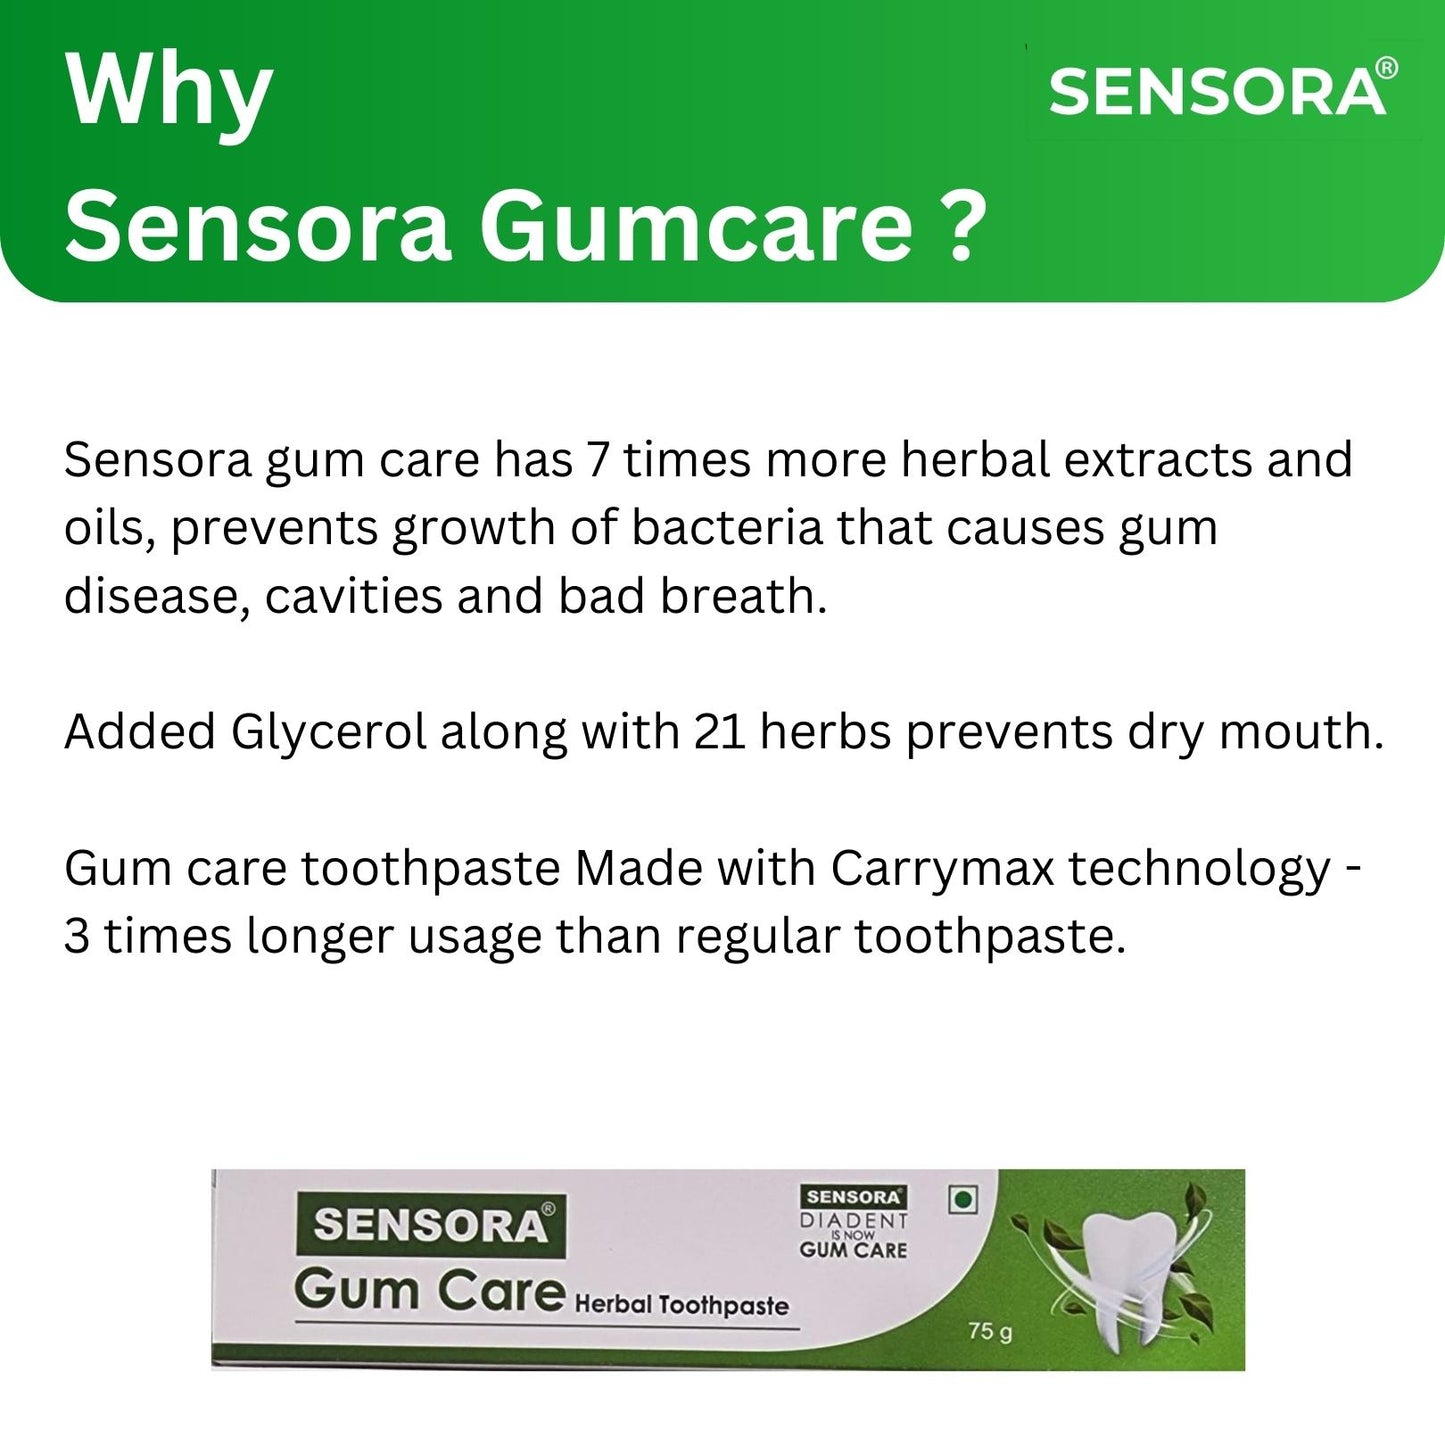 3+3 OFFER. SENSORA Gum Care Toothpaste - Pack of 3 and FREE 2 Super soft toothbrushes and 1 tongue cleaner